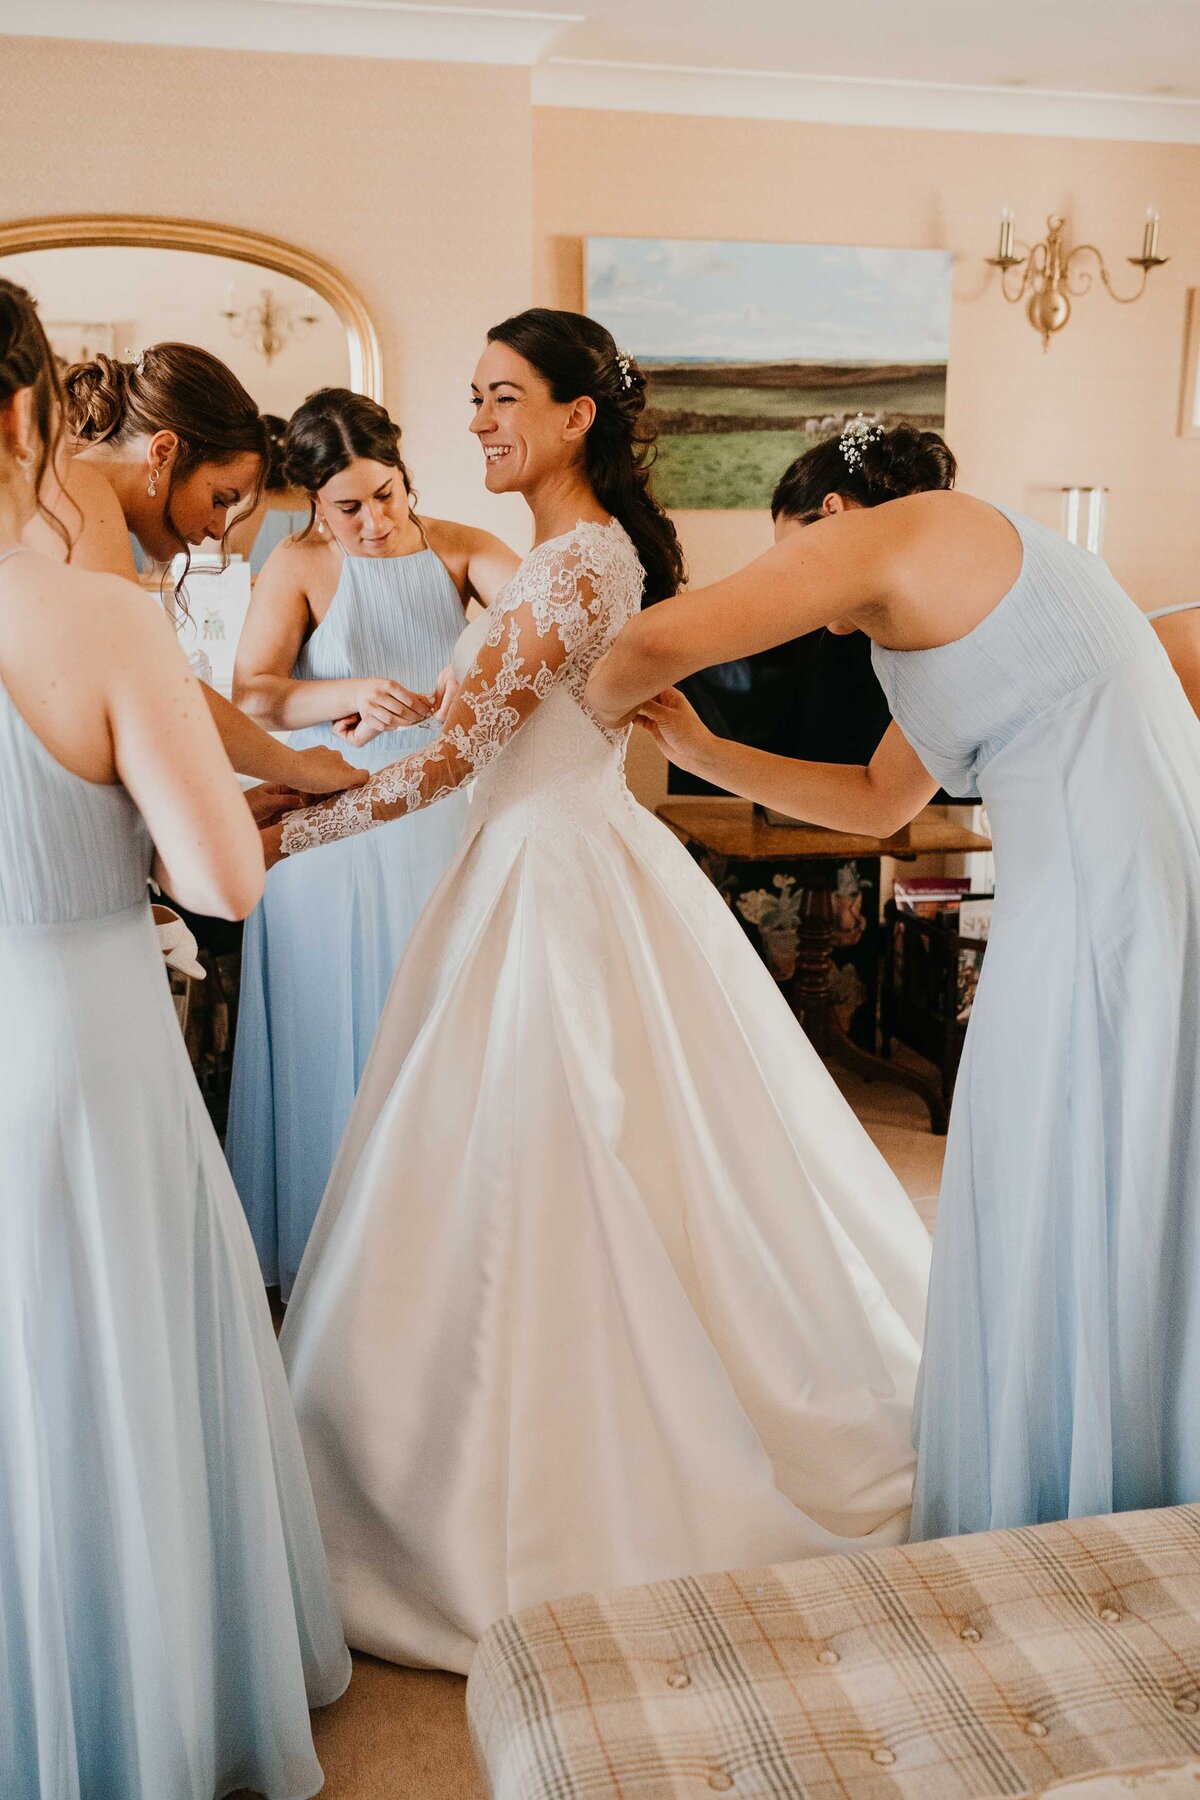 Bridesmaids helping bride get ready at Firle place wedding-1